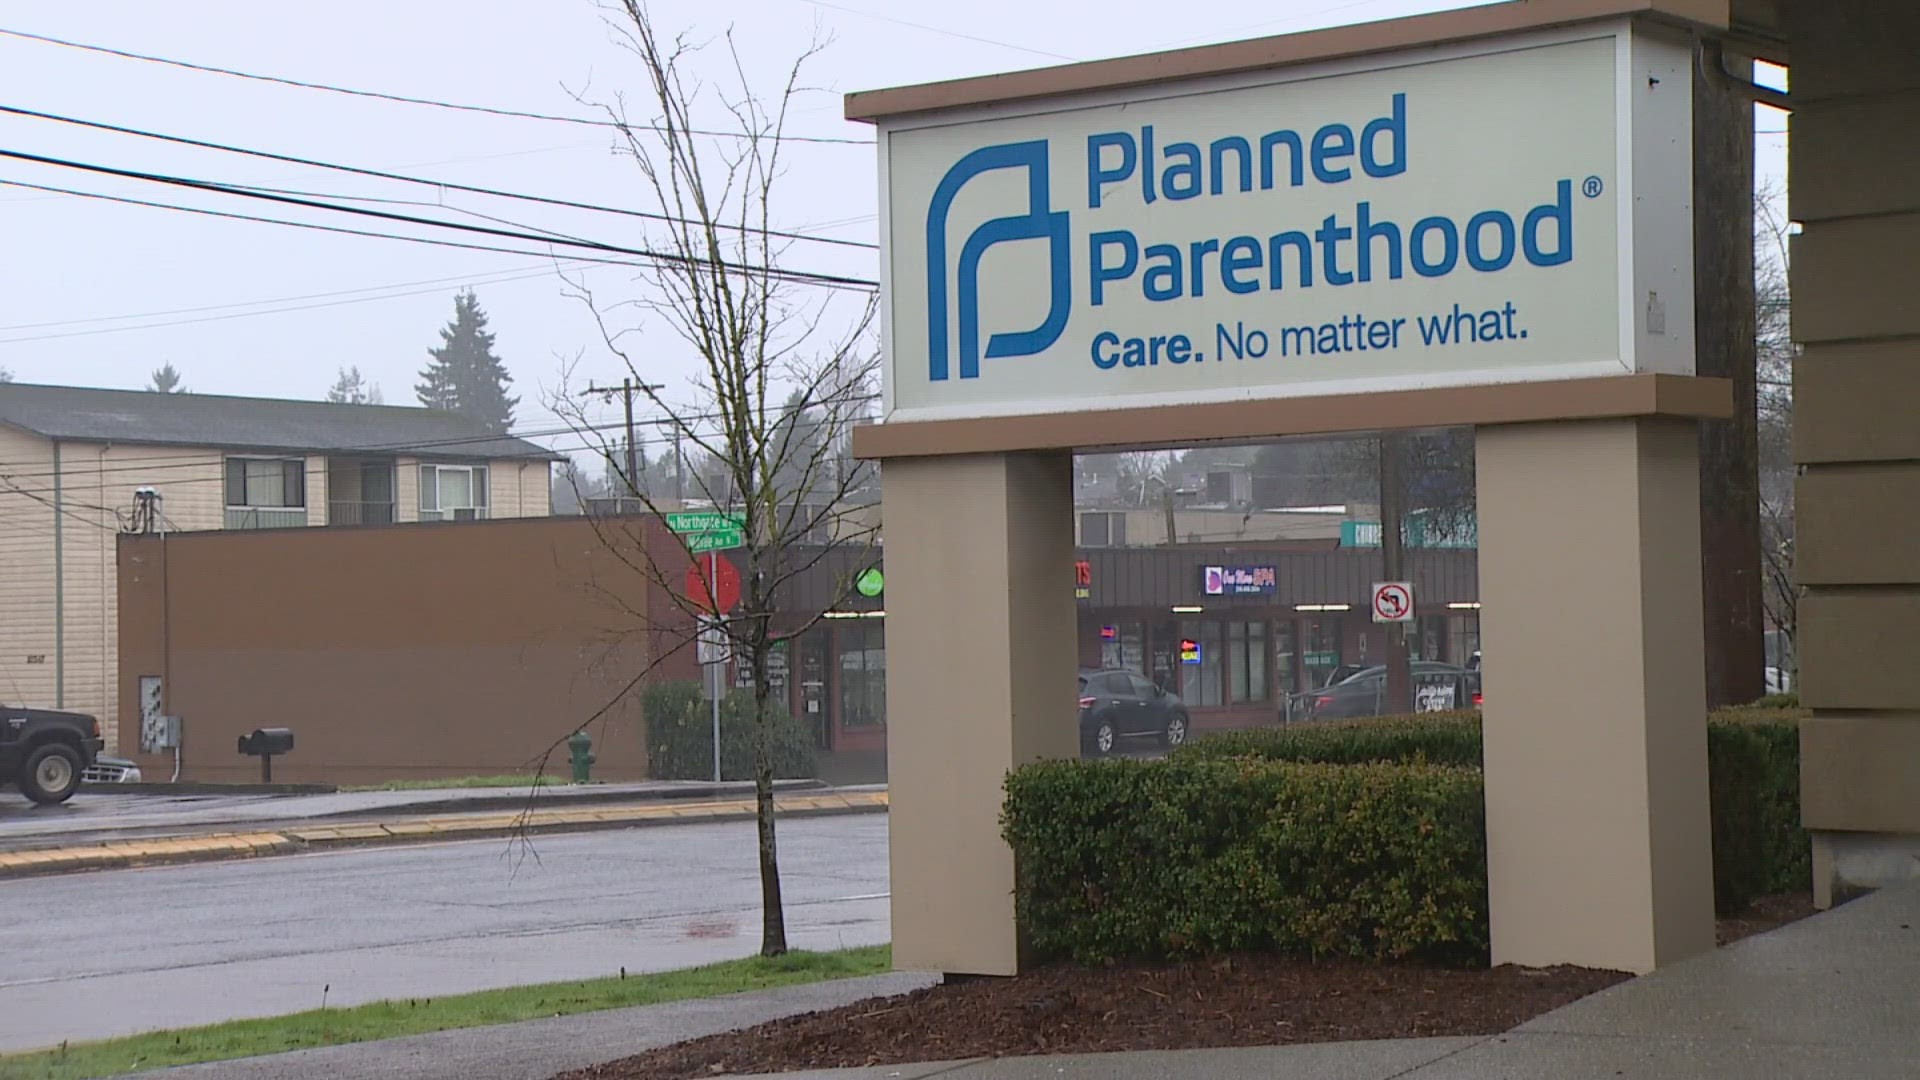 Planned Parenthood said the threats are causing fear, making it difficult to find local staff.